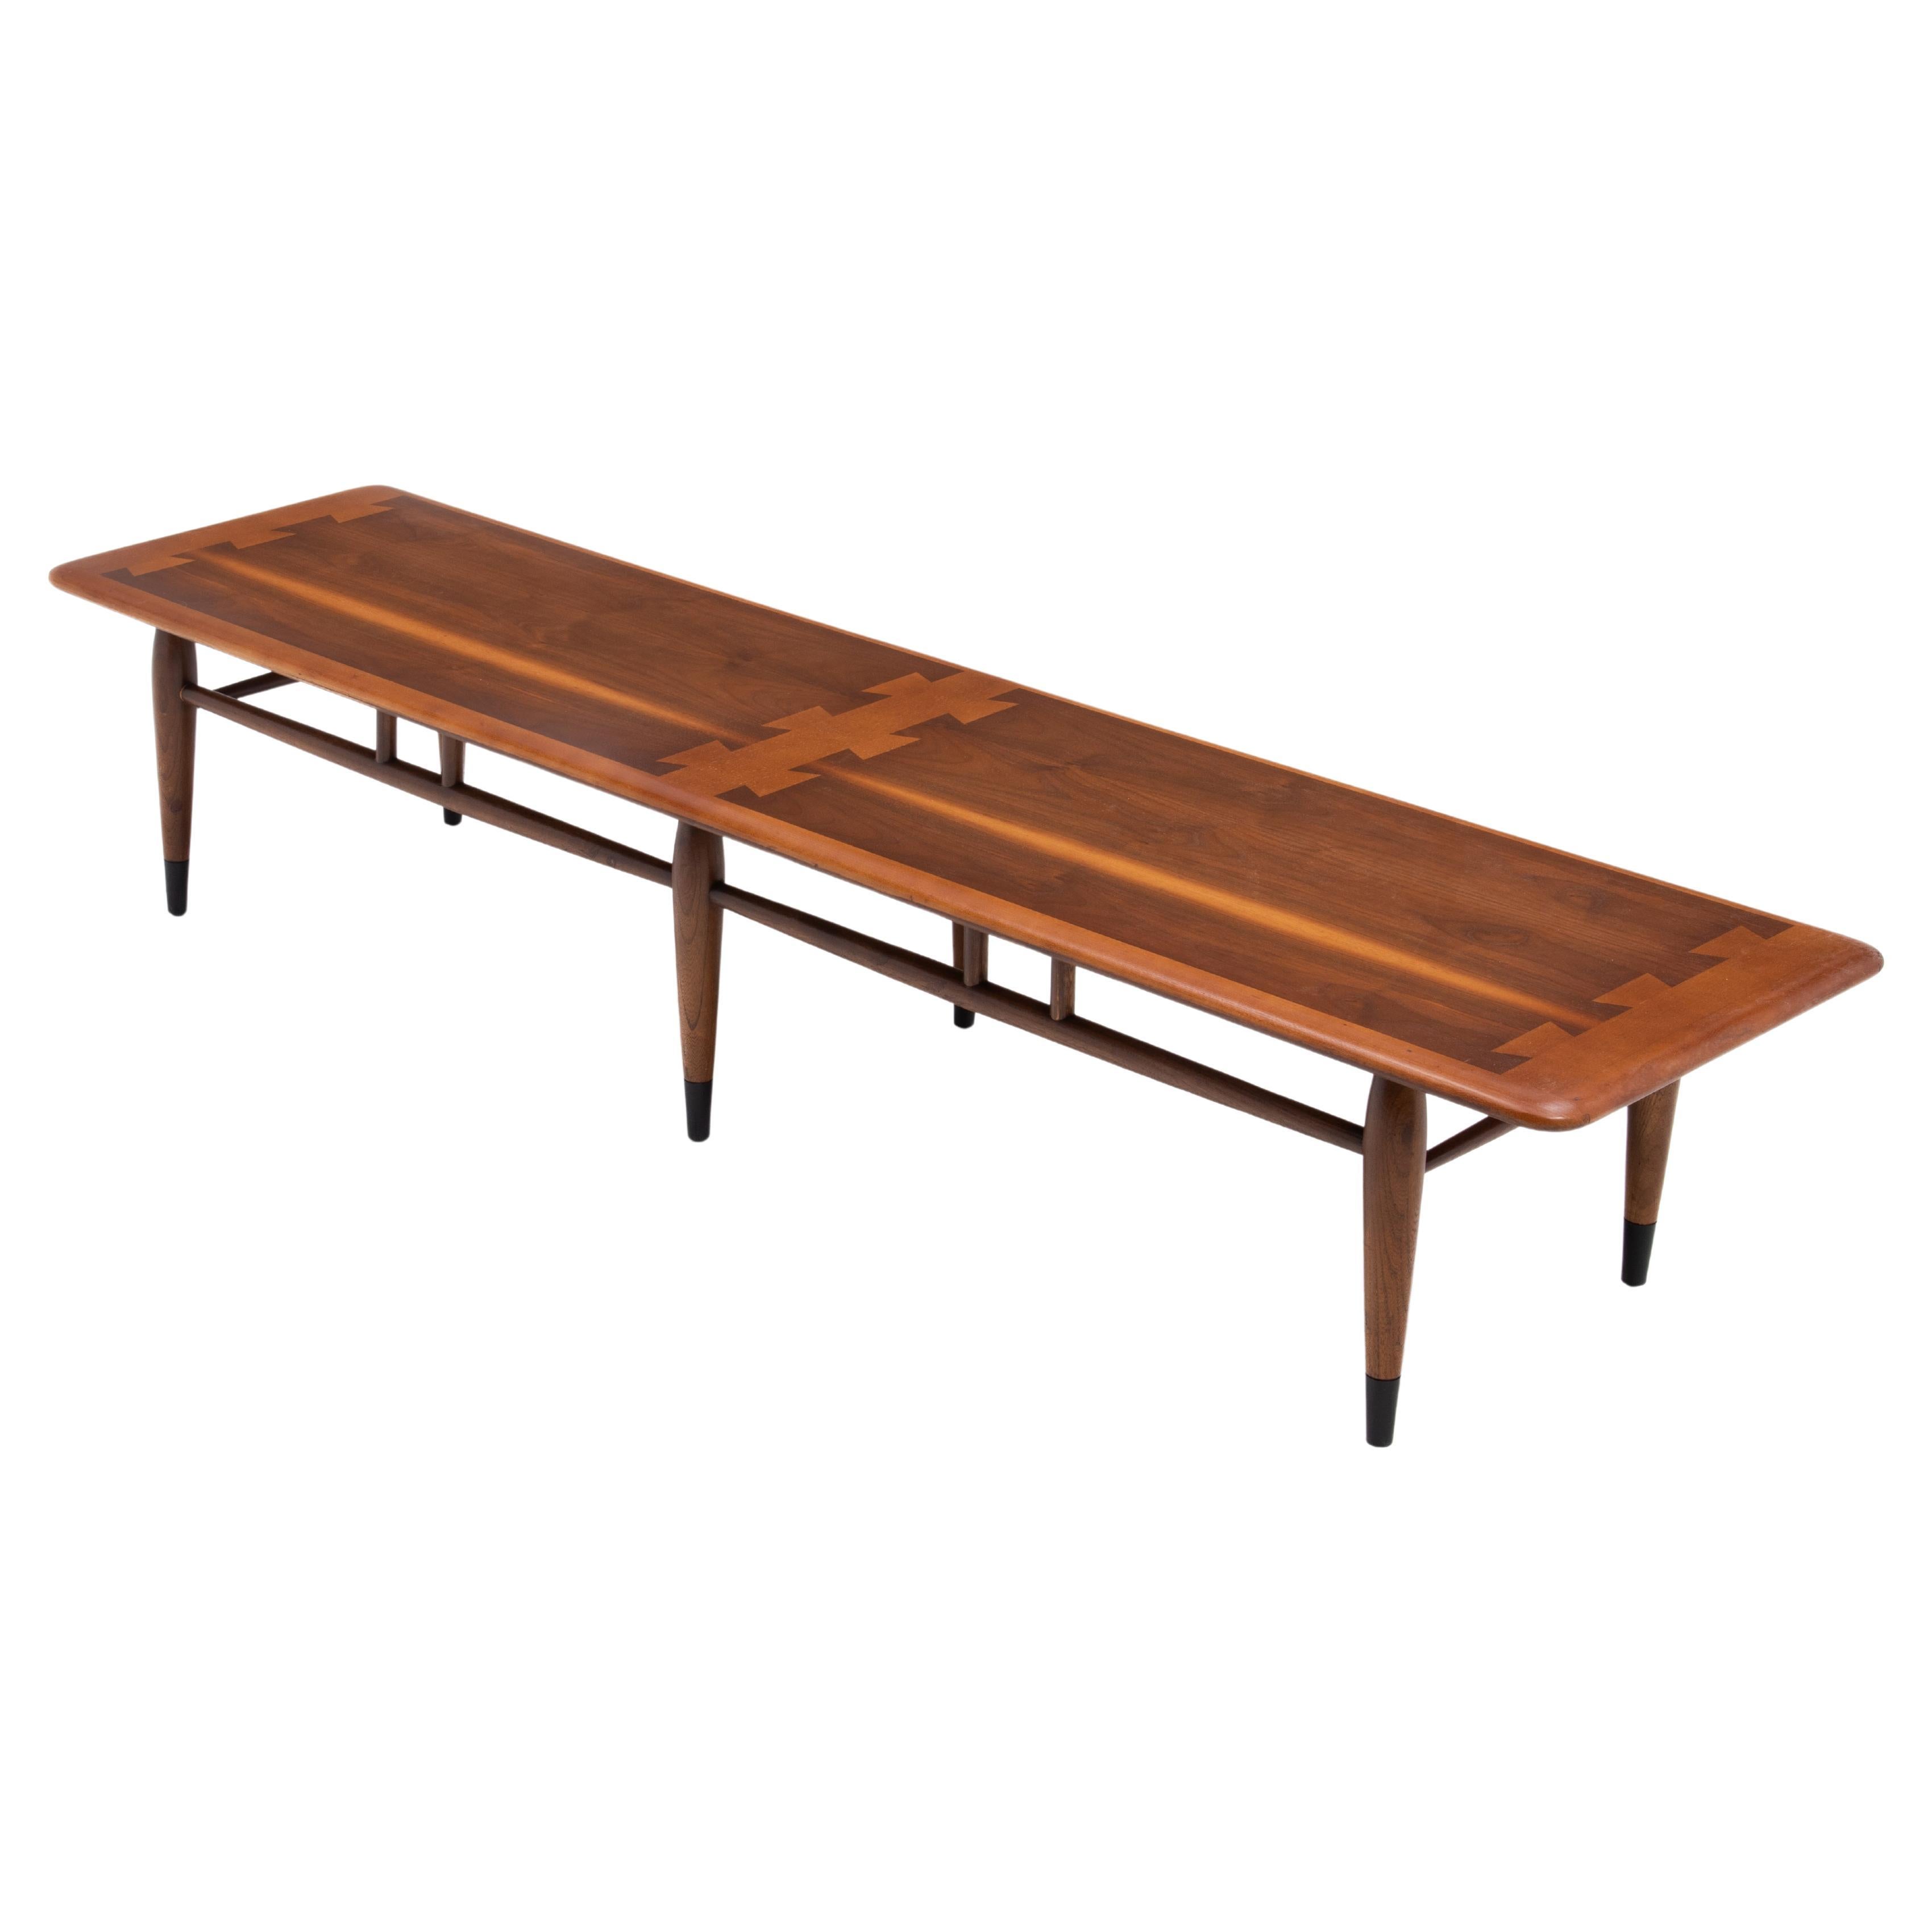 Mid-Century Modern Lane Acclaim Walnut Coffee Table Andre Bus Style 900 09 For Sale